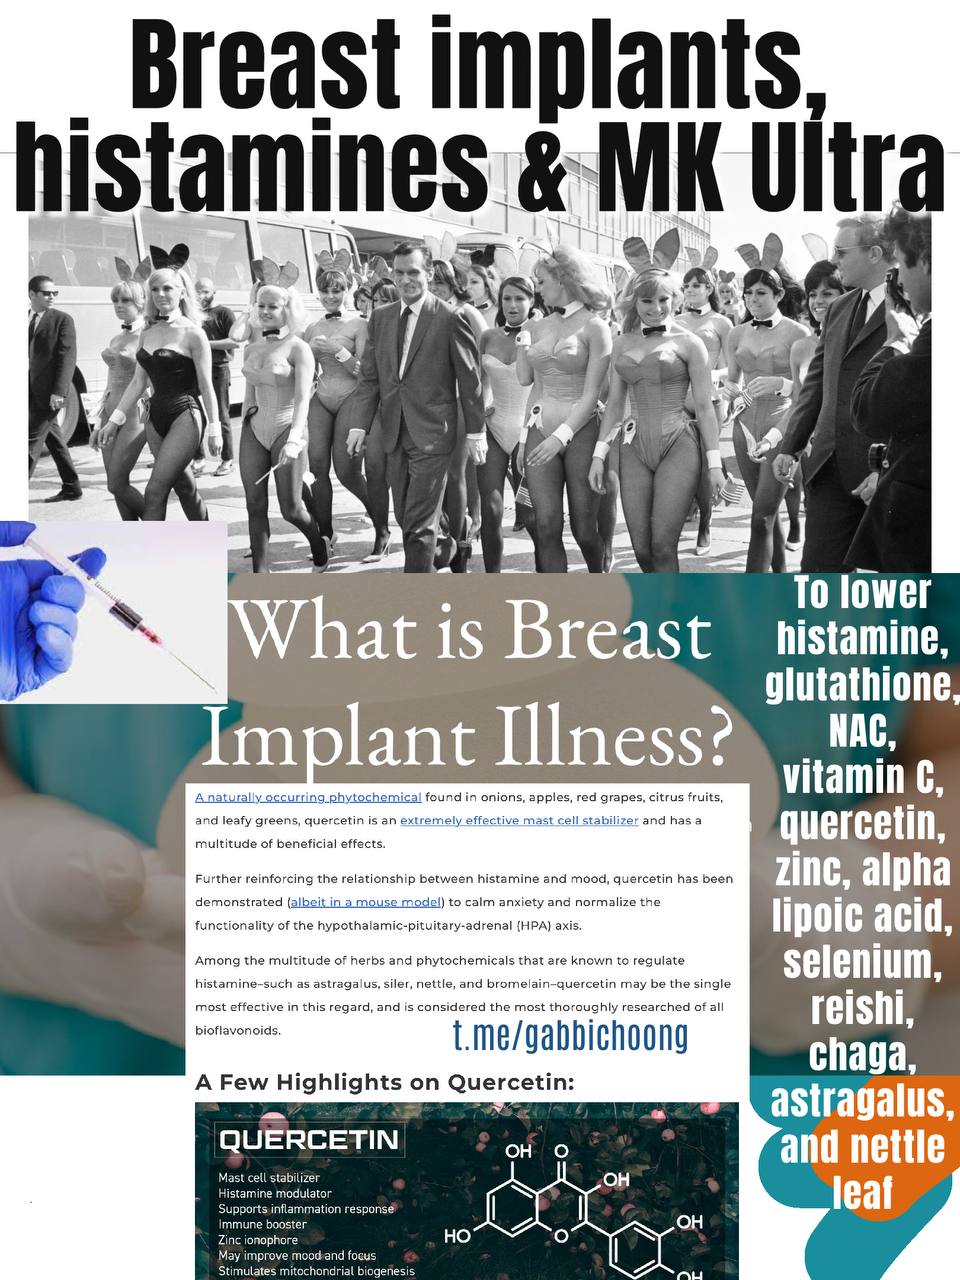 Breast implants, histamines, and MK Ultra - Our mental states are intimately intertwined with the inflammation in our bodies